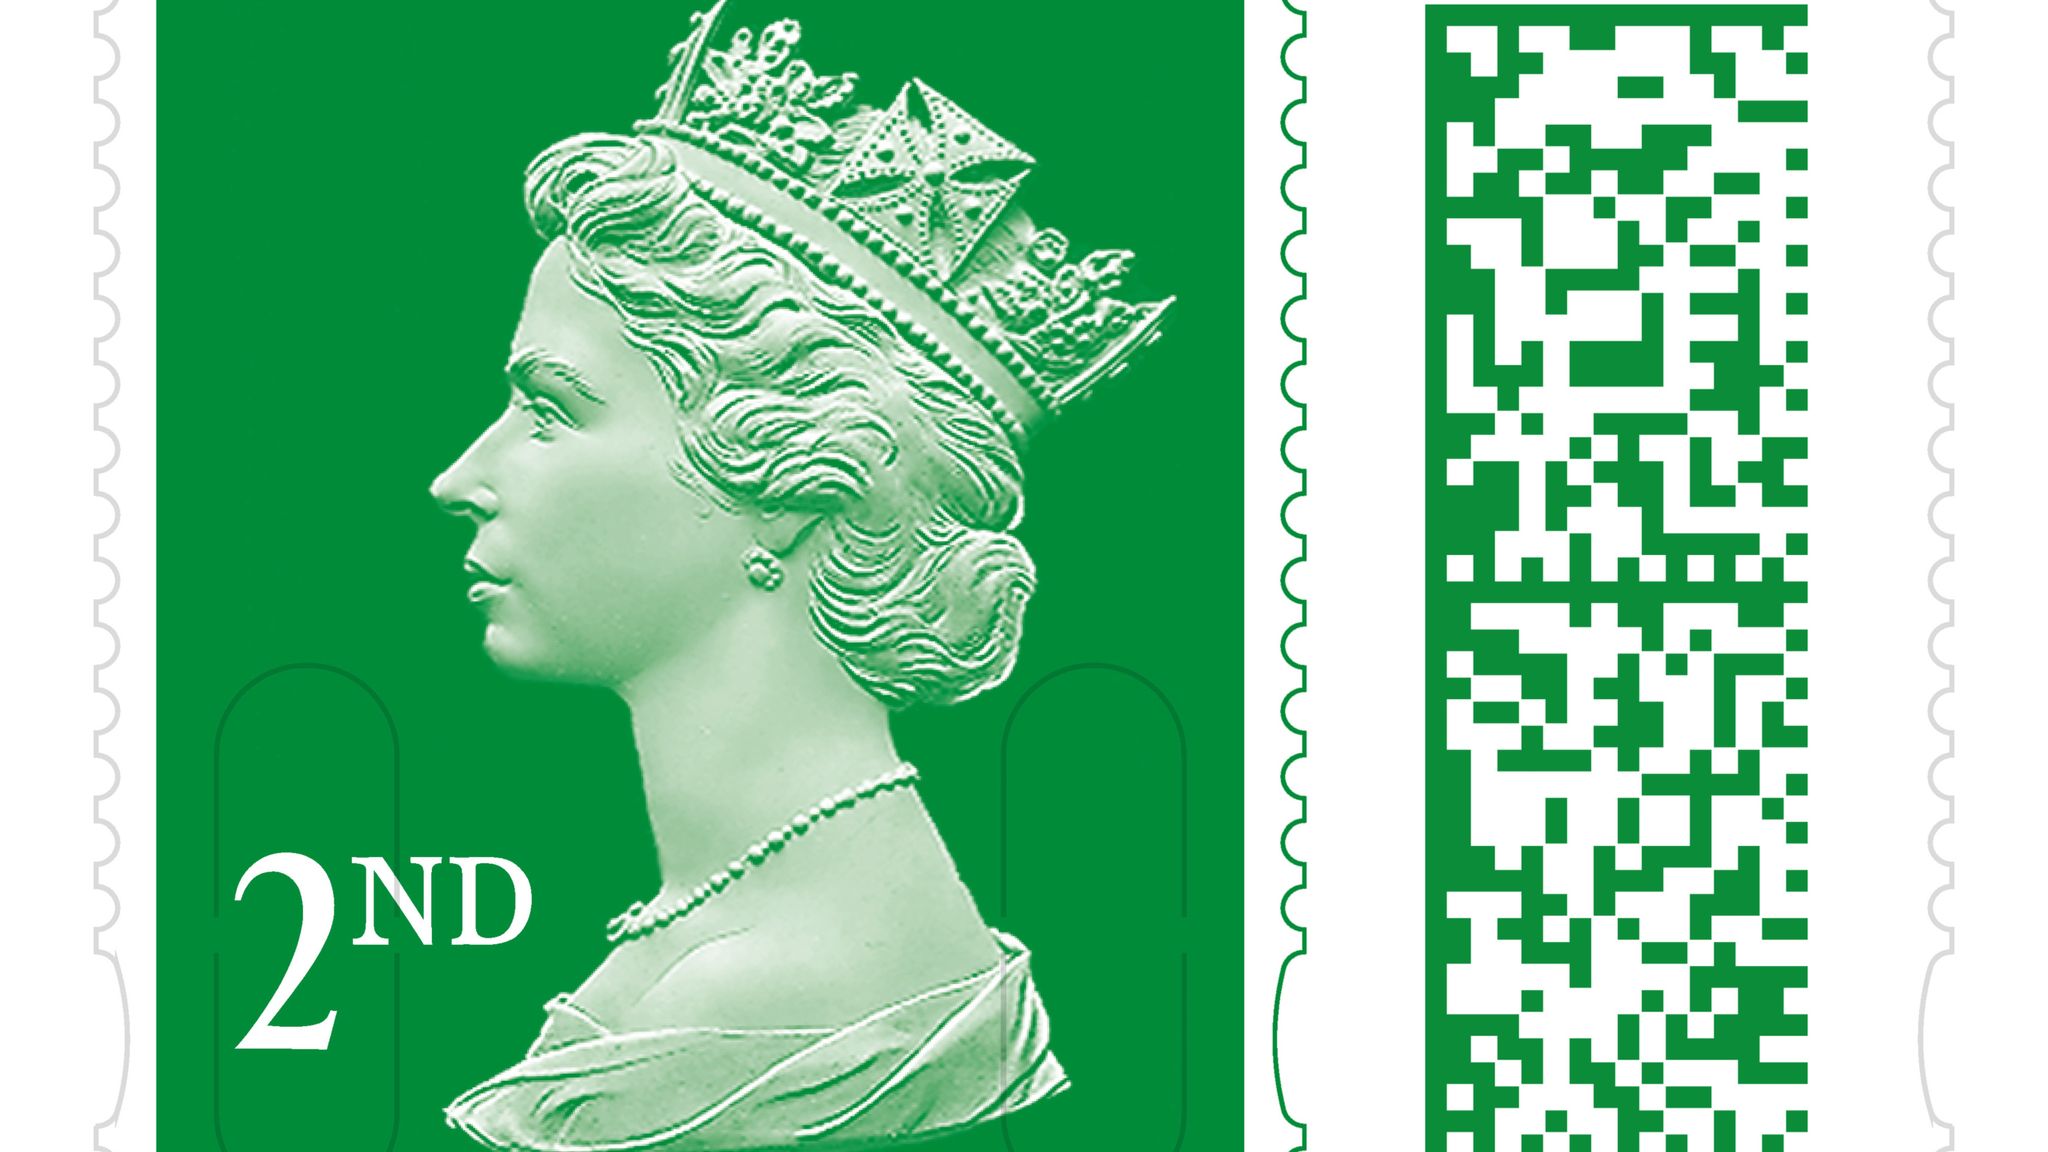 royal-mail-adds-barcodes-to-stamps-allowing-people-to-watch-videos-or